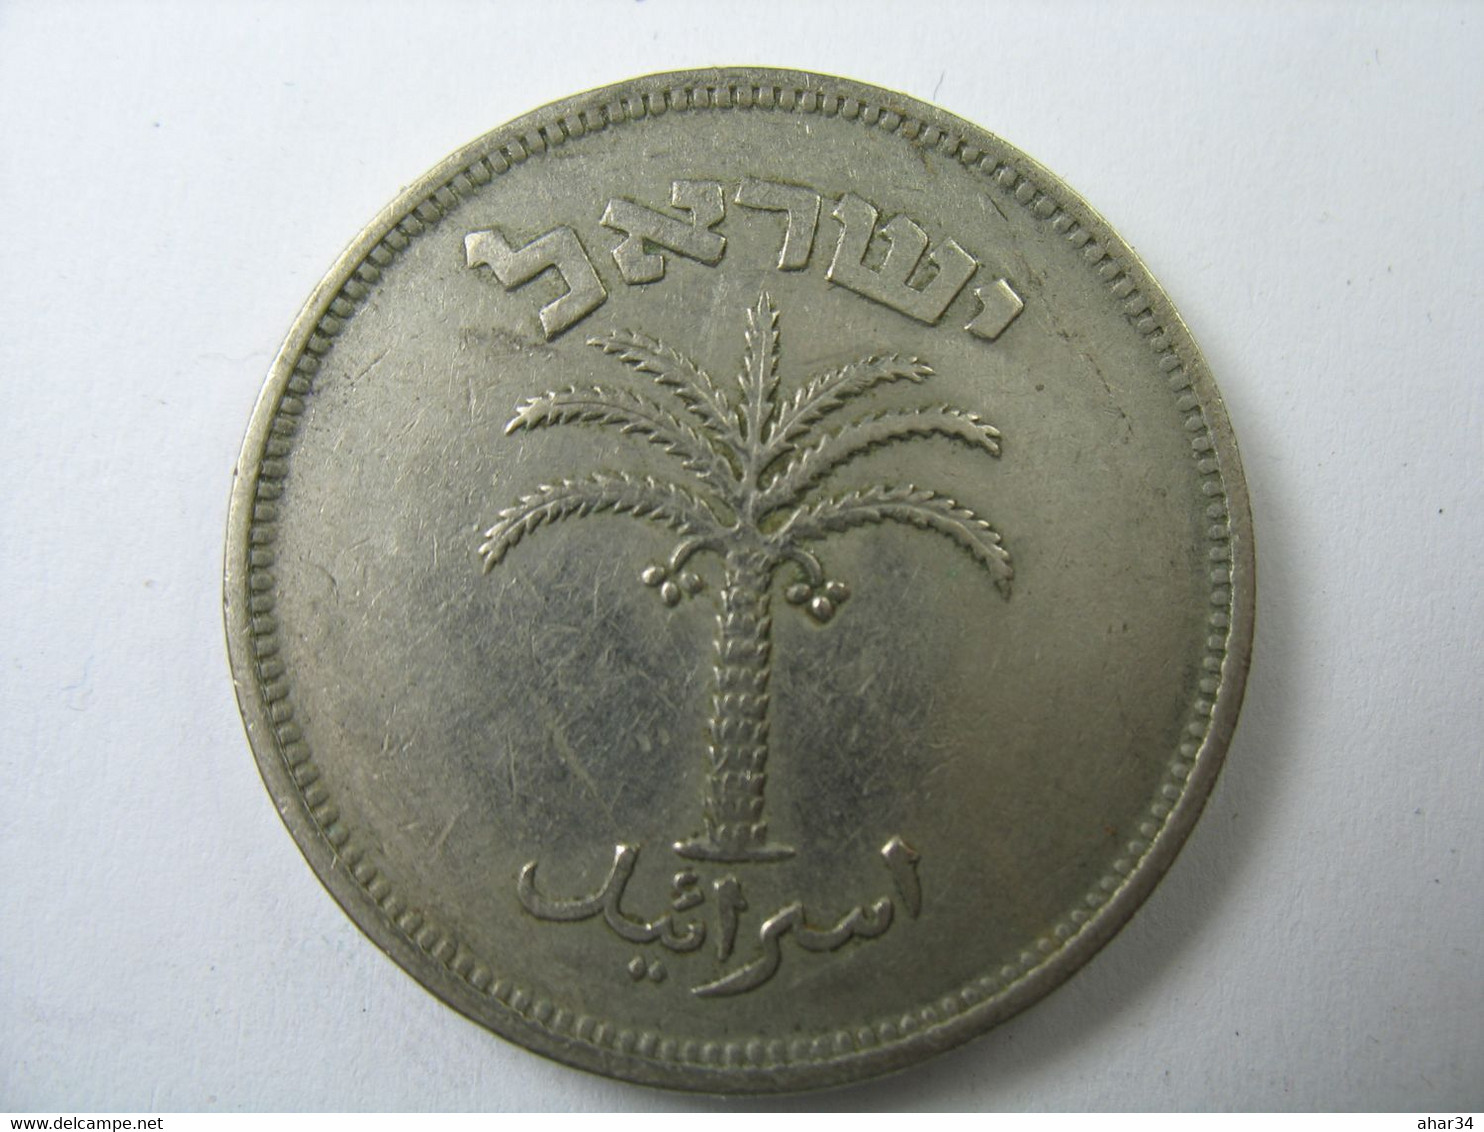 TEMPLATE LISTING ISRAEL  LOT OF  50  COINS 100 PRUTA PRUTOT 1949  COIN FREE SHIPPING  BY SURFACE REGISTERED MAIL. . - Sonstige – Asien